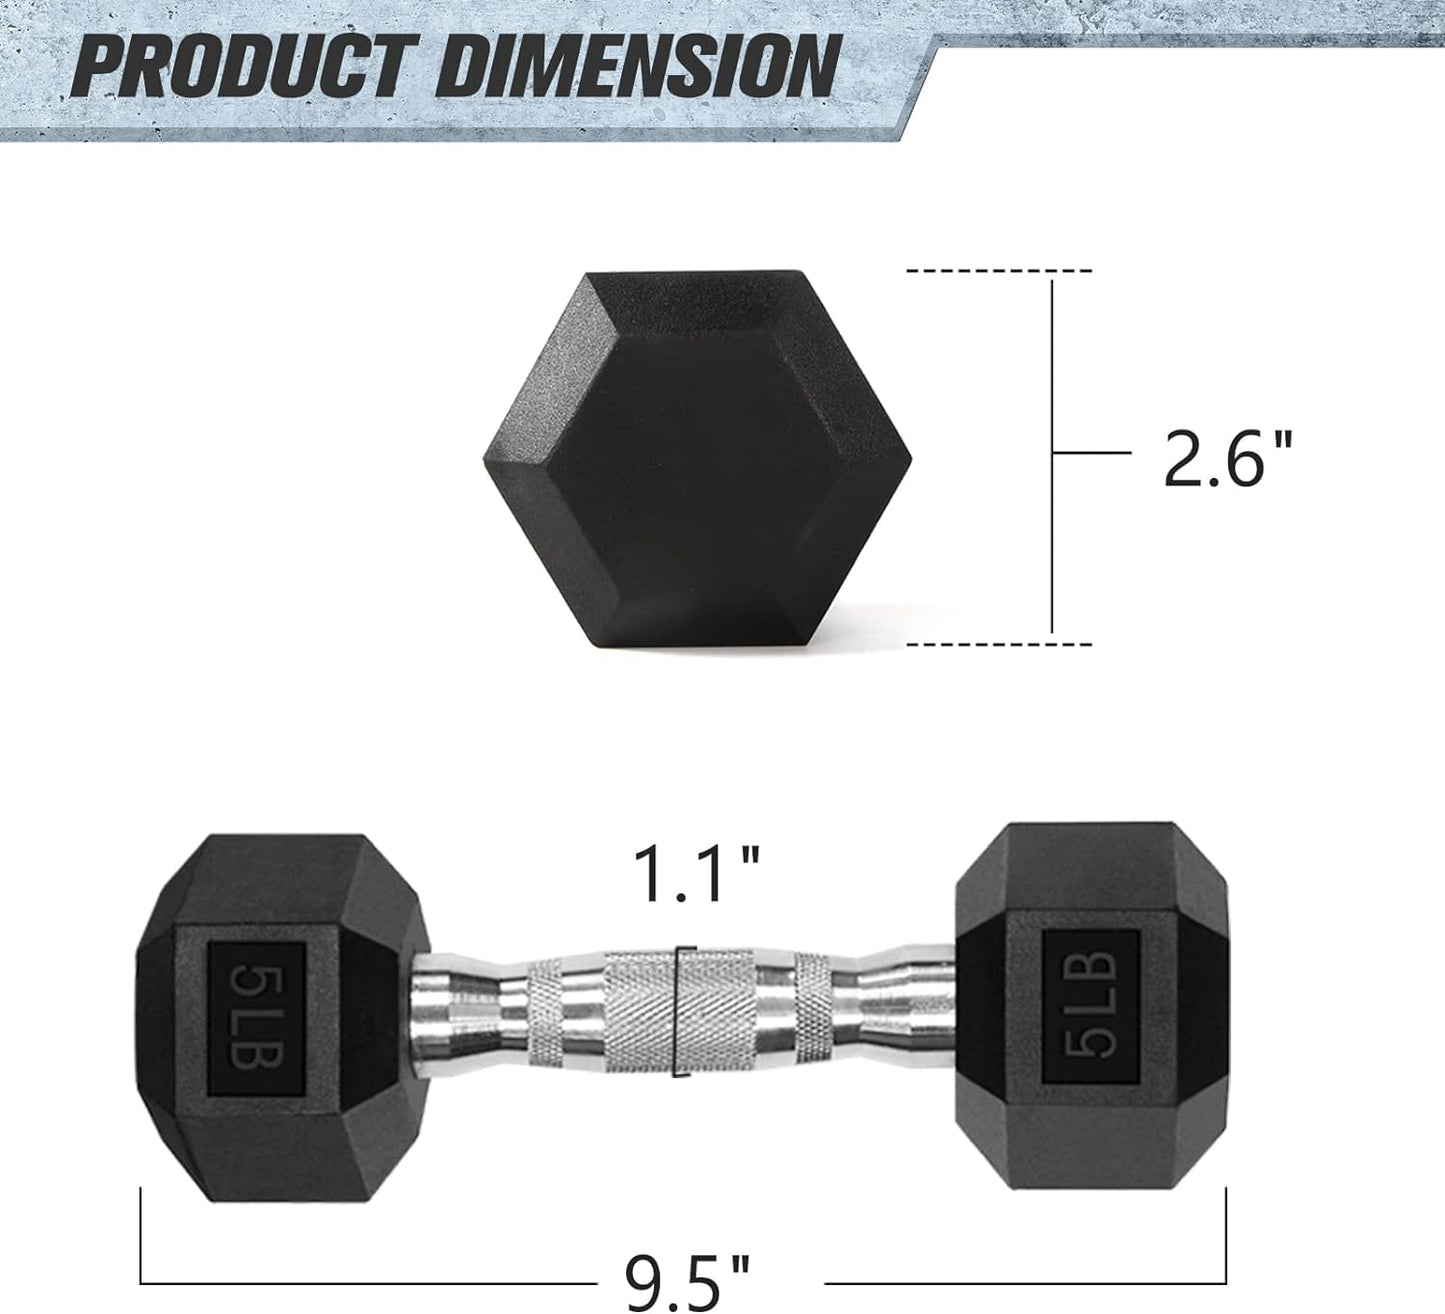 5-300LBS Rubber Encased Hex Dumbbell Sets with Optional Rack